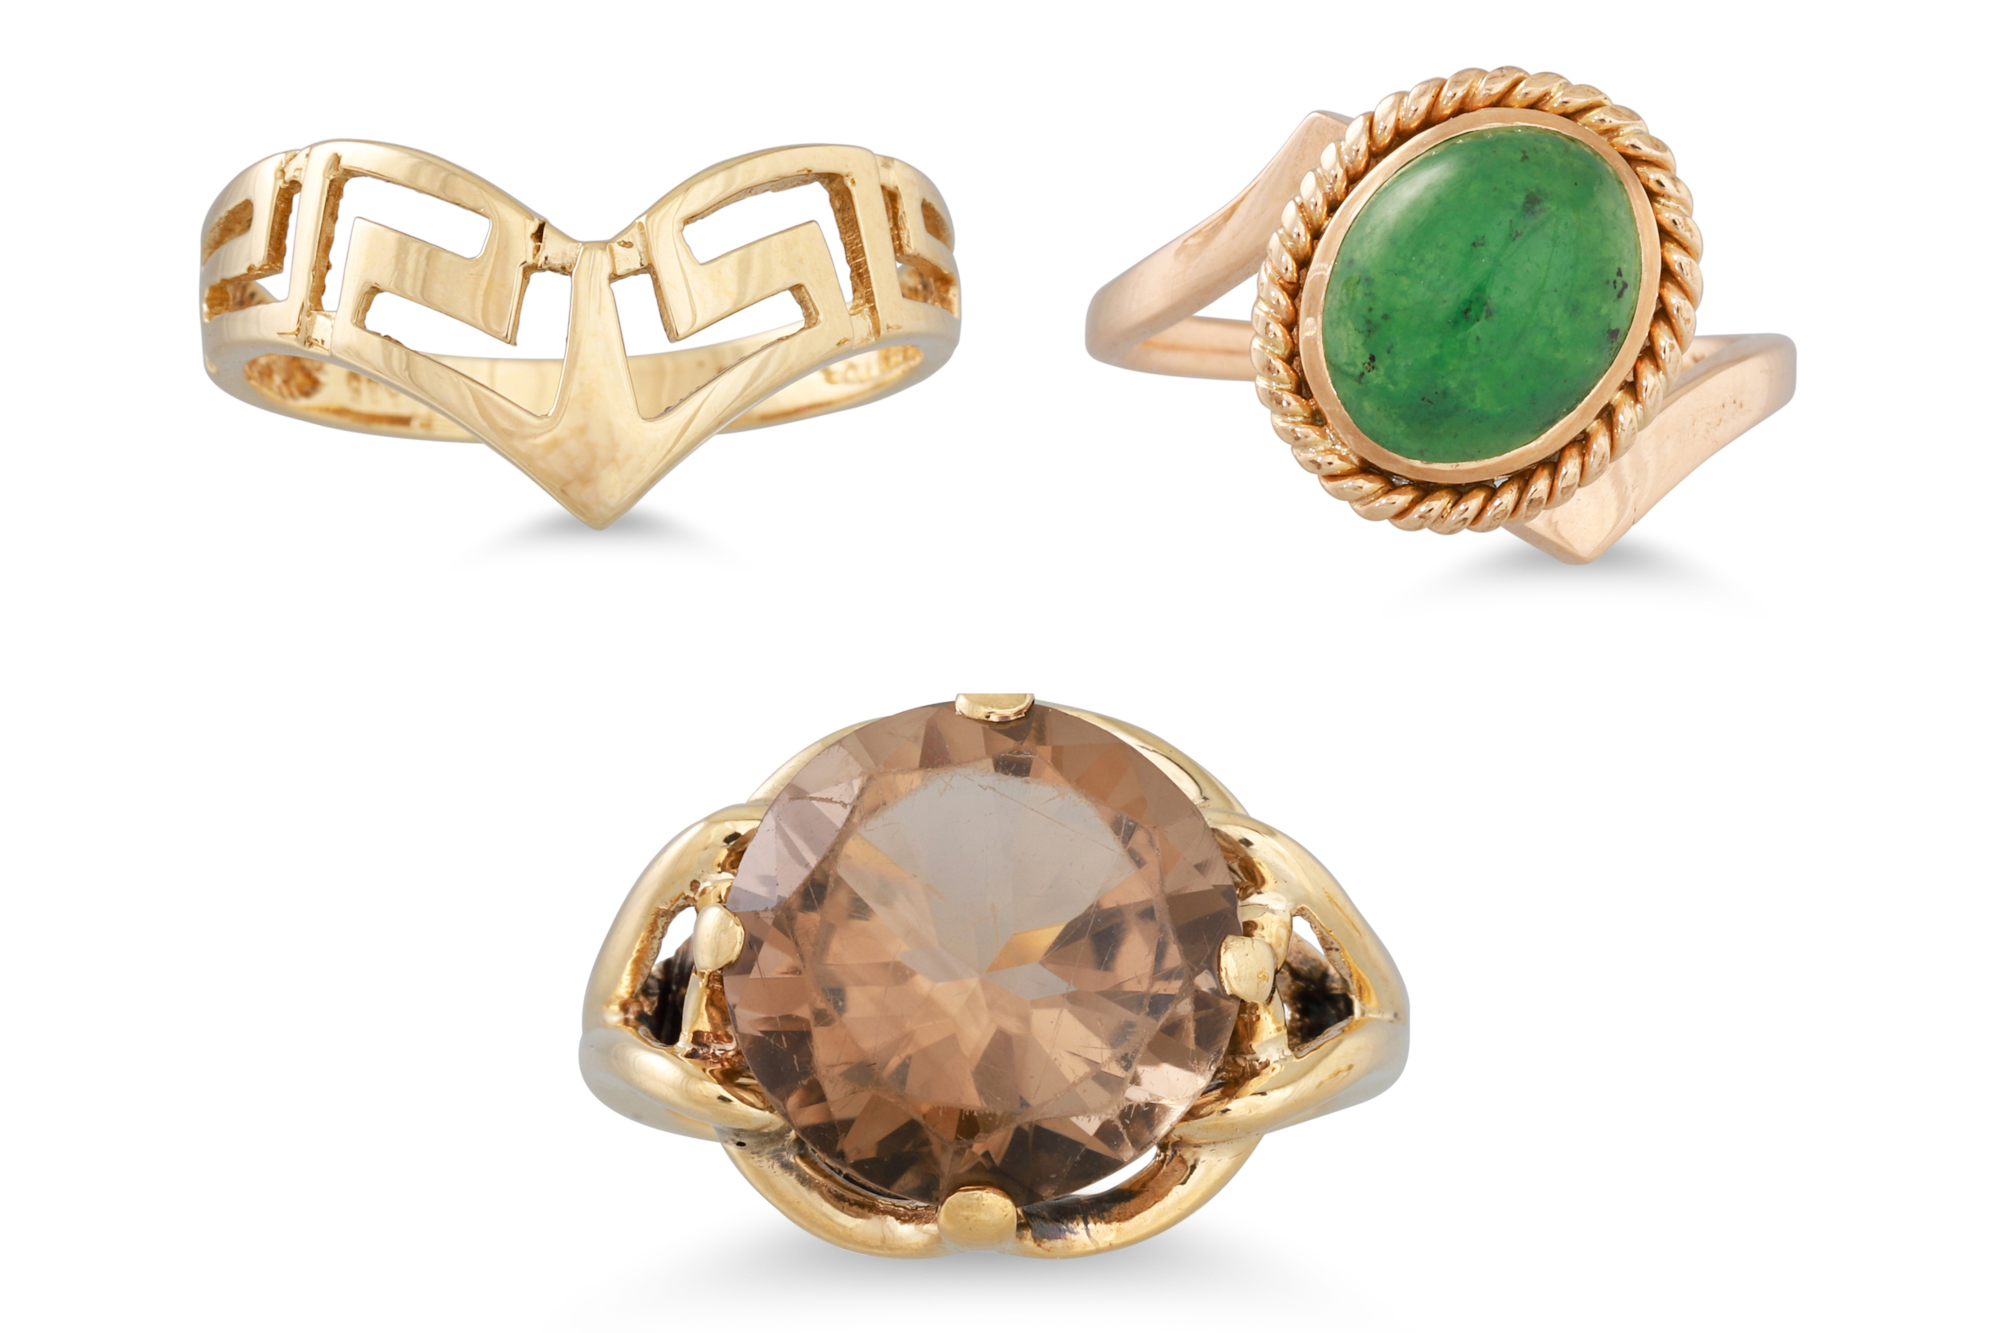 A TOPAZ RING, mounted in 10ct gold, size M, together with a 14ct gold cabochon ring, size O and a